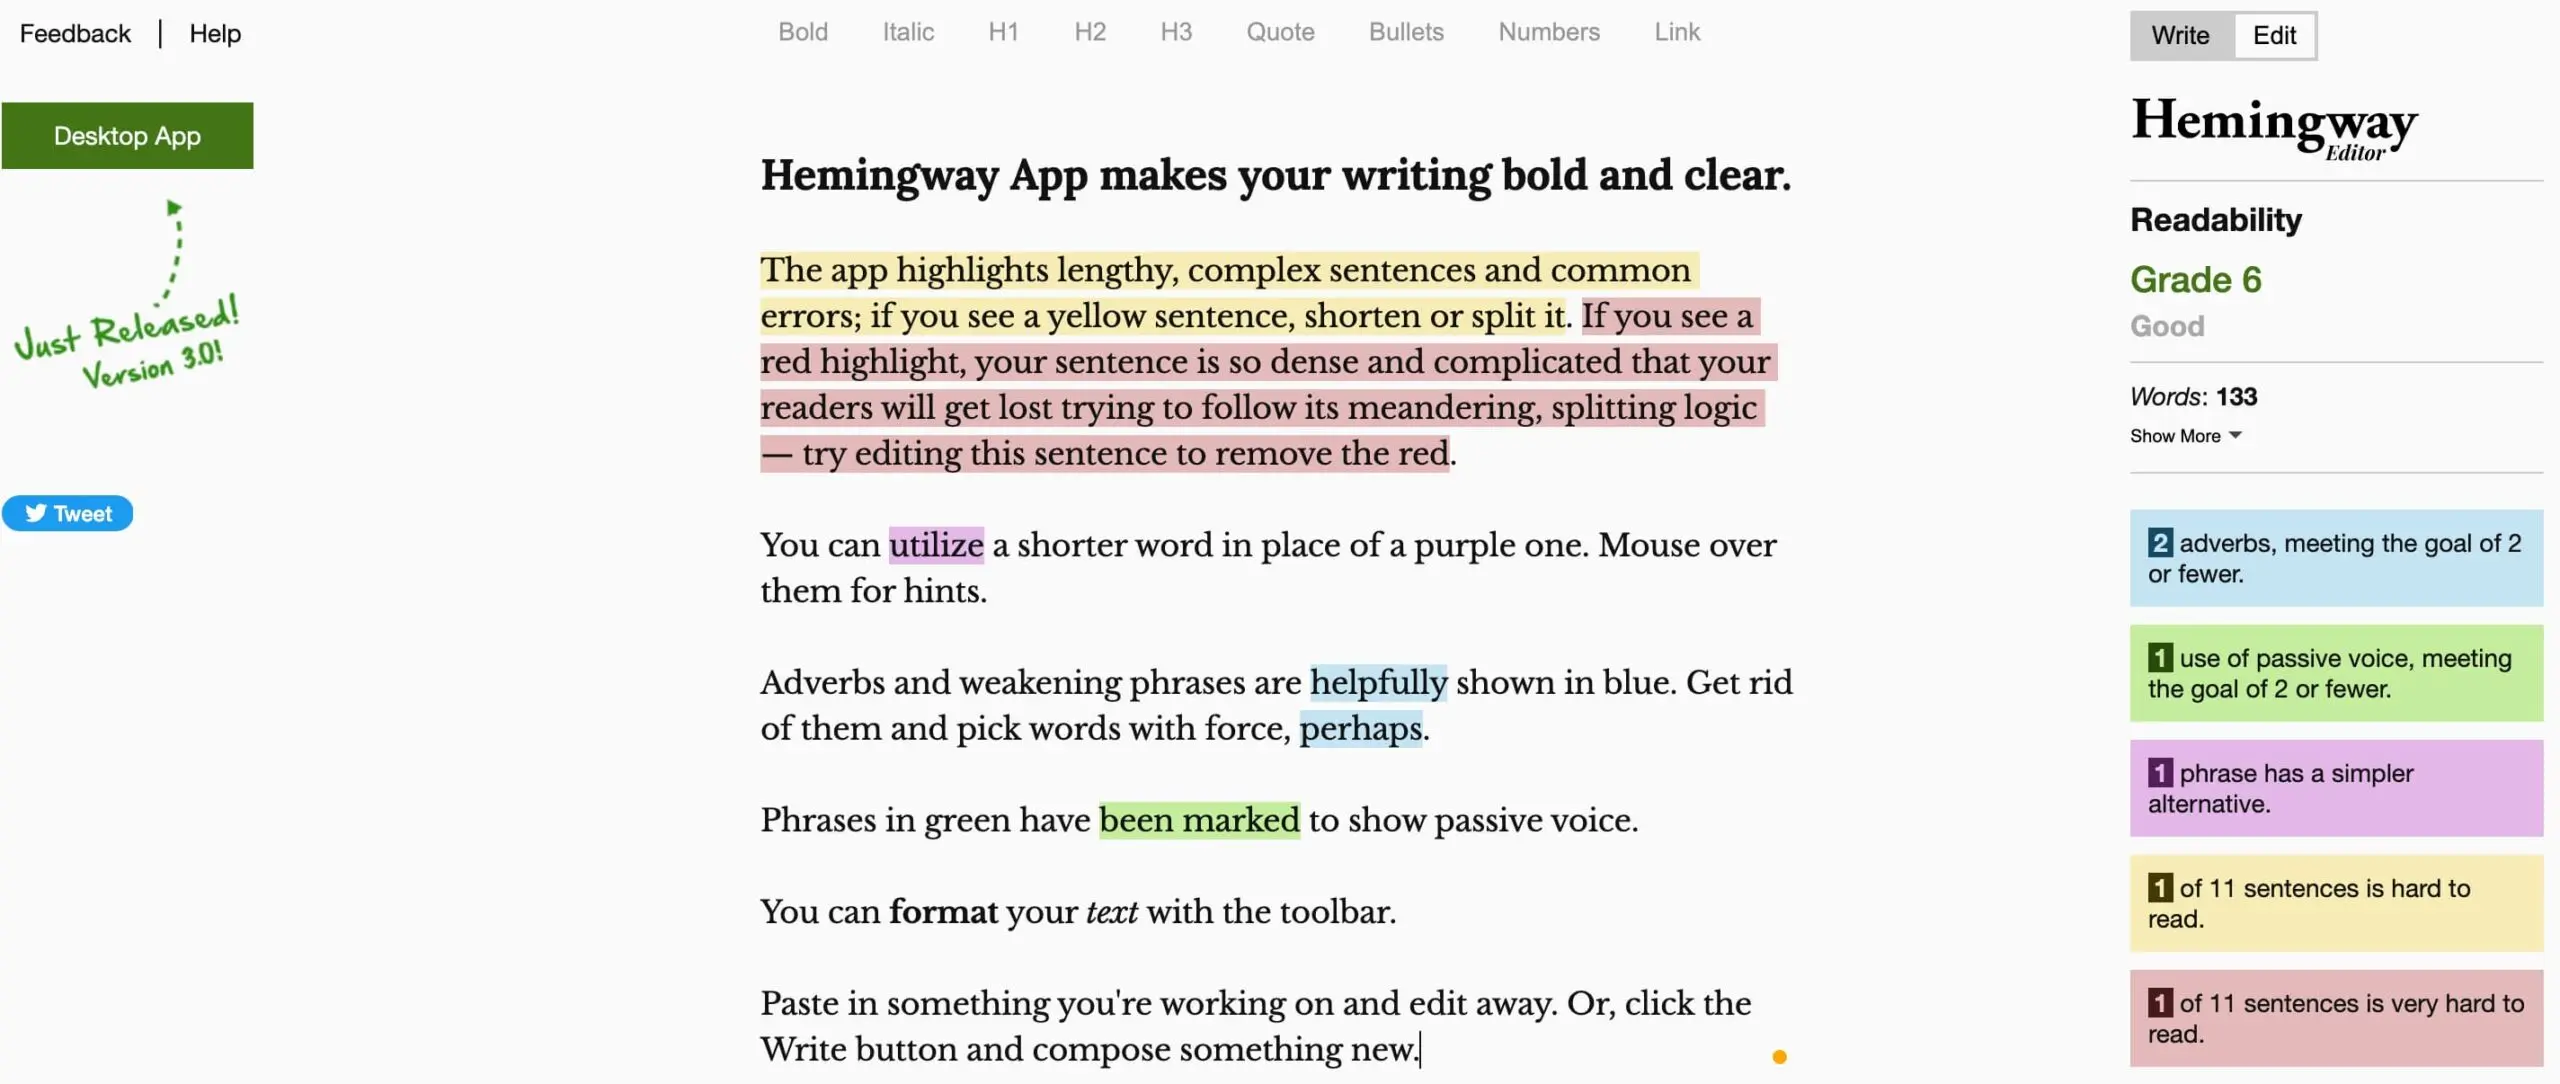 A screenshot of the Hemingway website, one of the best ai tools for digital marketing